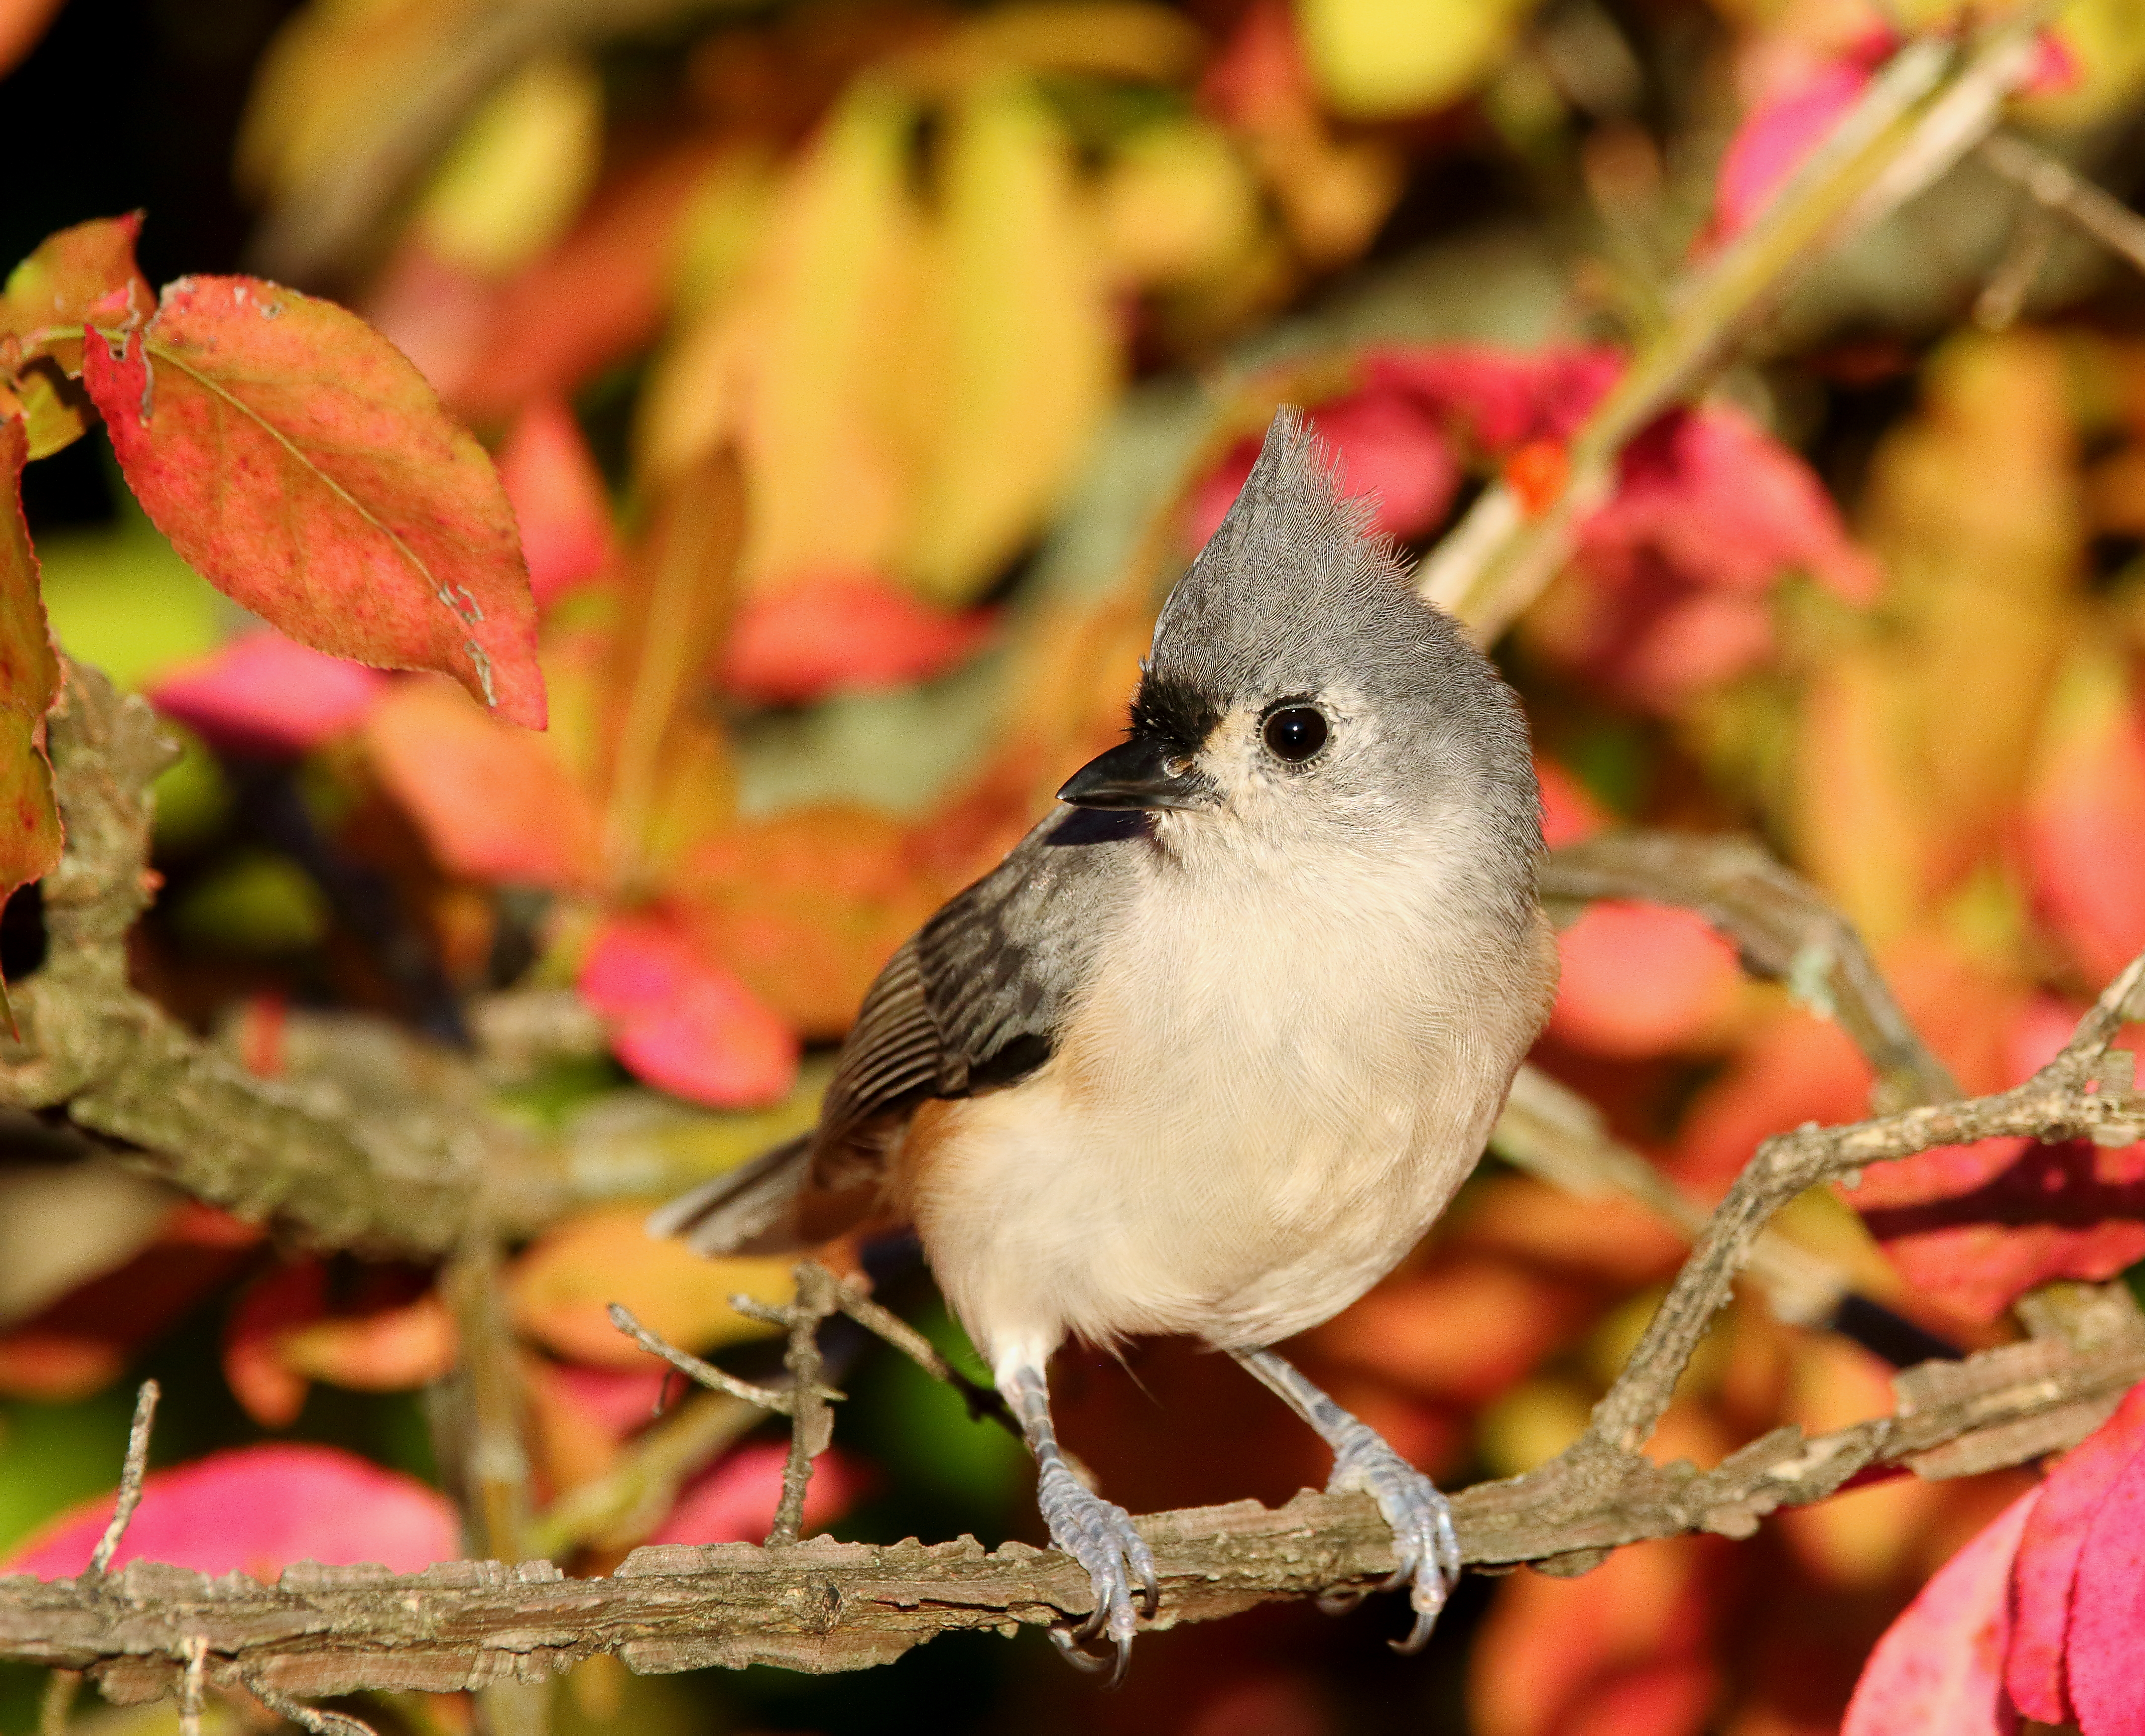 Tufted Titmice thrive in the woodlands of Clay Pit Ponds State Park. Photo: <a href="https://www.flickr.com/photos/120553232@N02/" target="_blank">Isaac Grant</a>